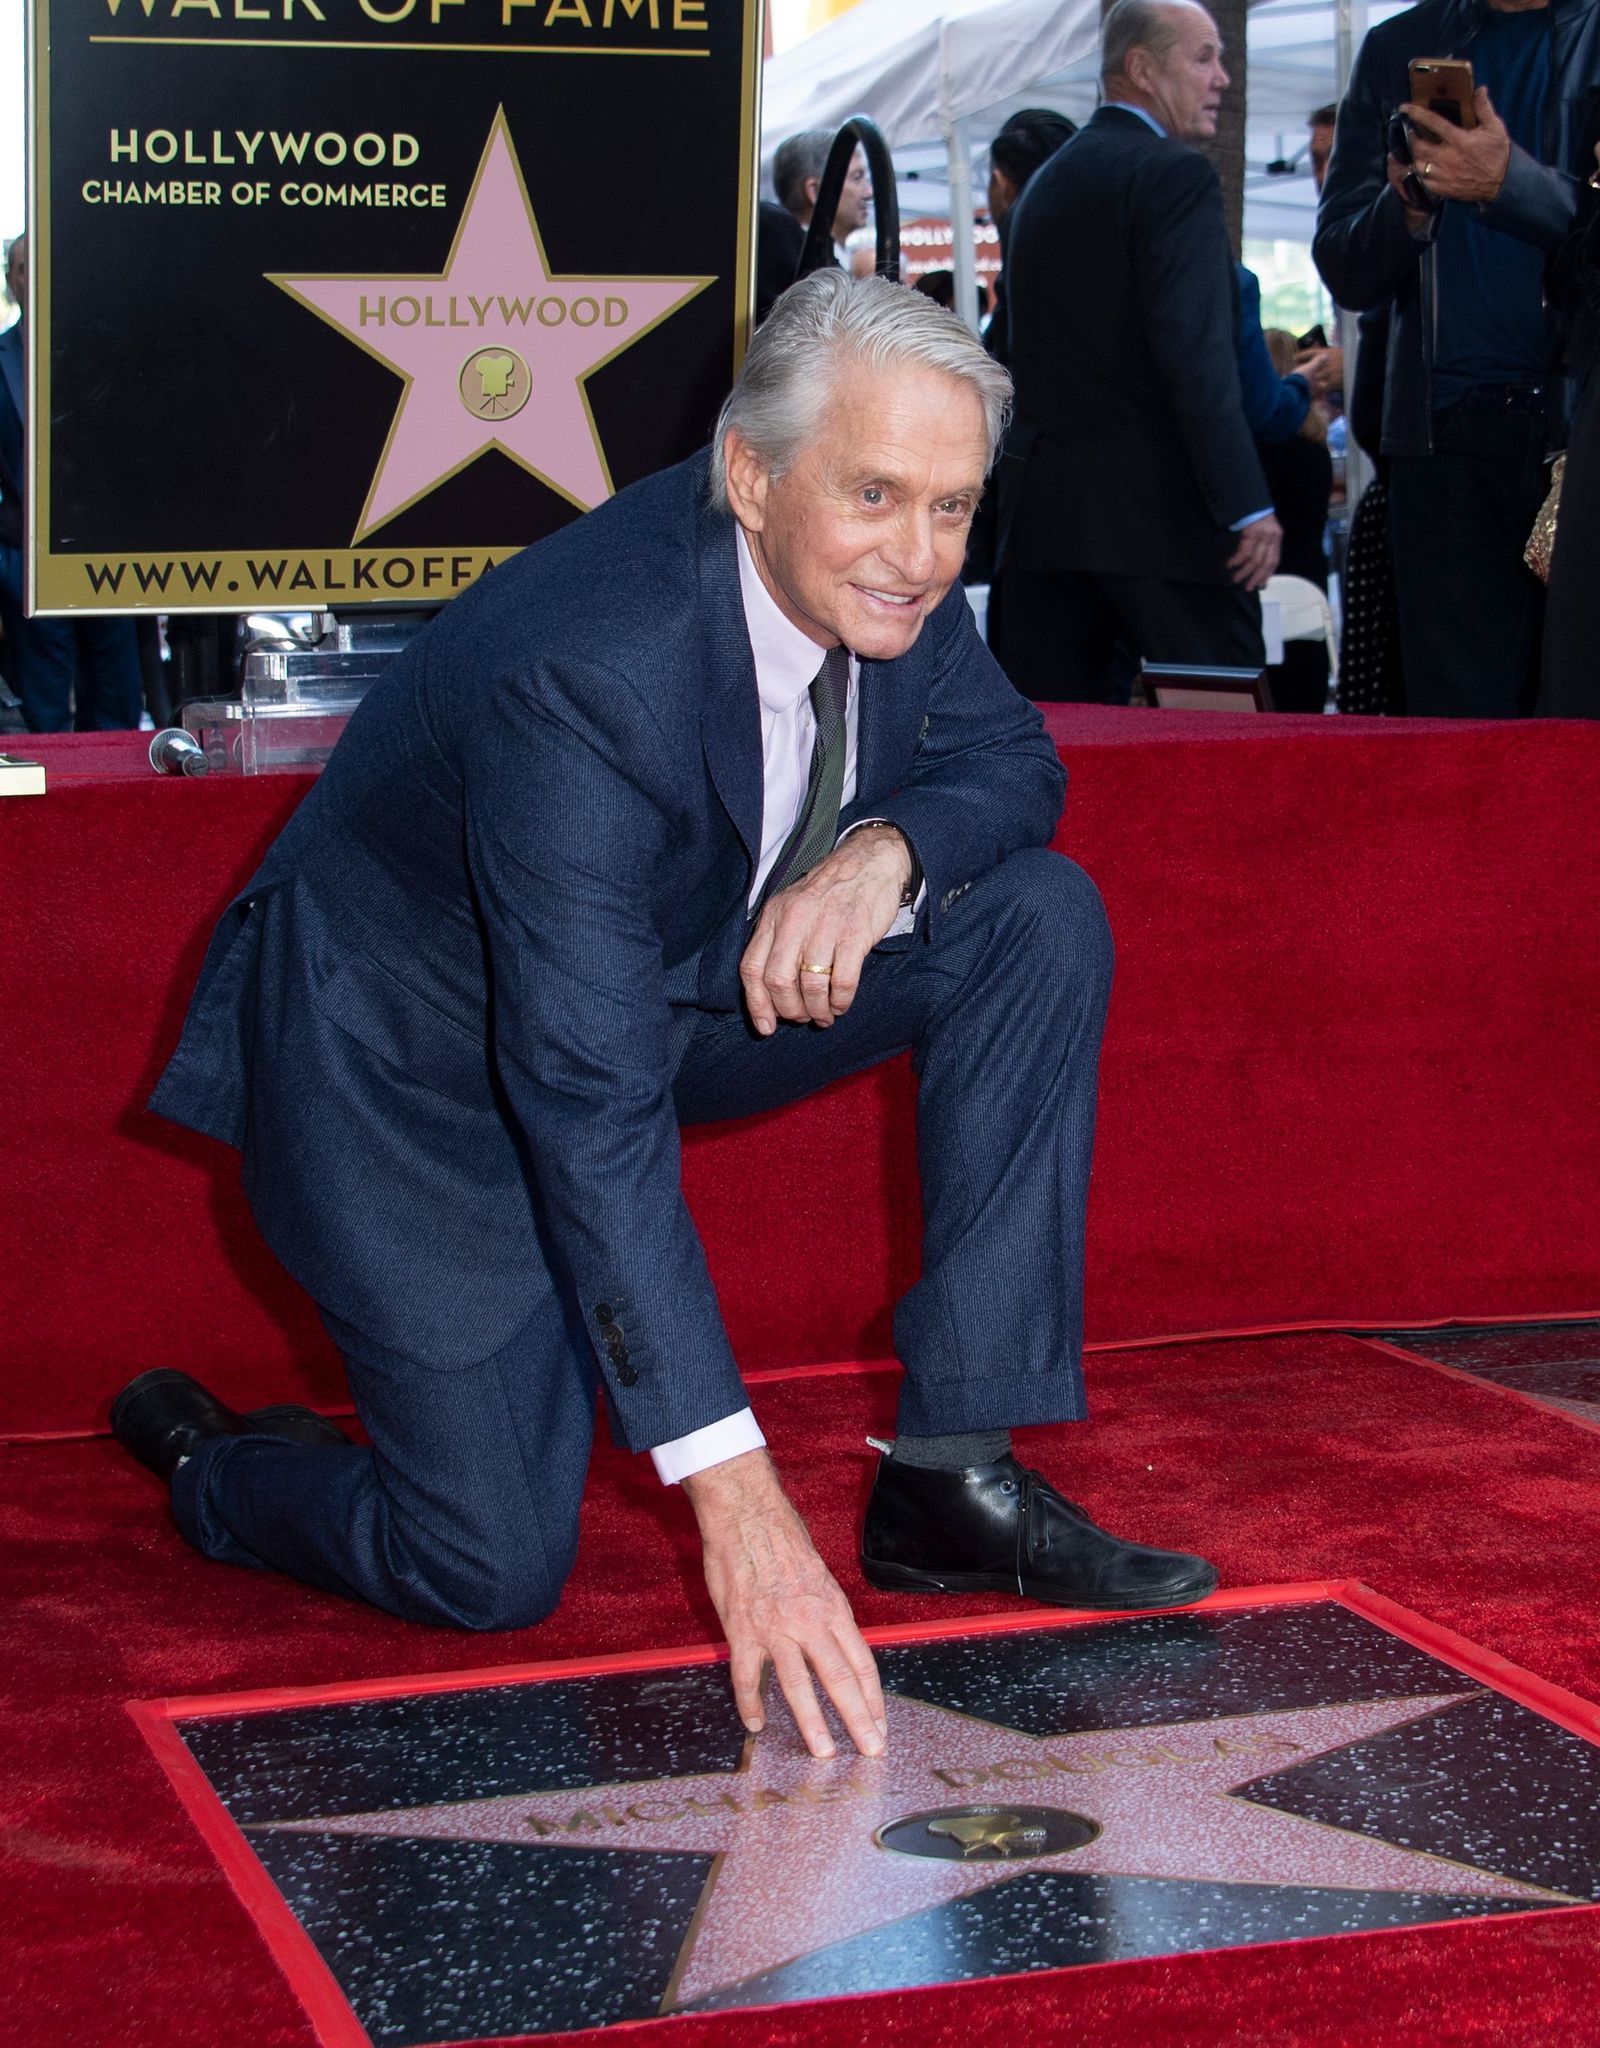 After nearly five decades in the acting world, Michael Douglas was honored with a star on the Hollywood Walk of Fame on Nov. 6, 2018. Douglas, whose career has been lauded for star turns in films like 